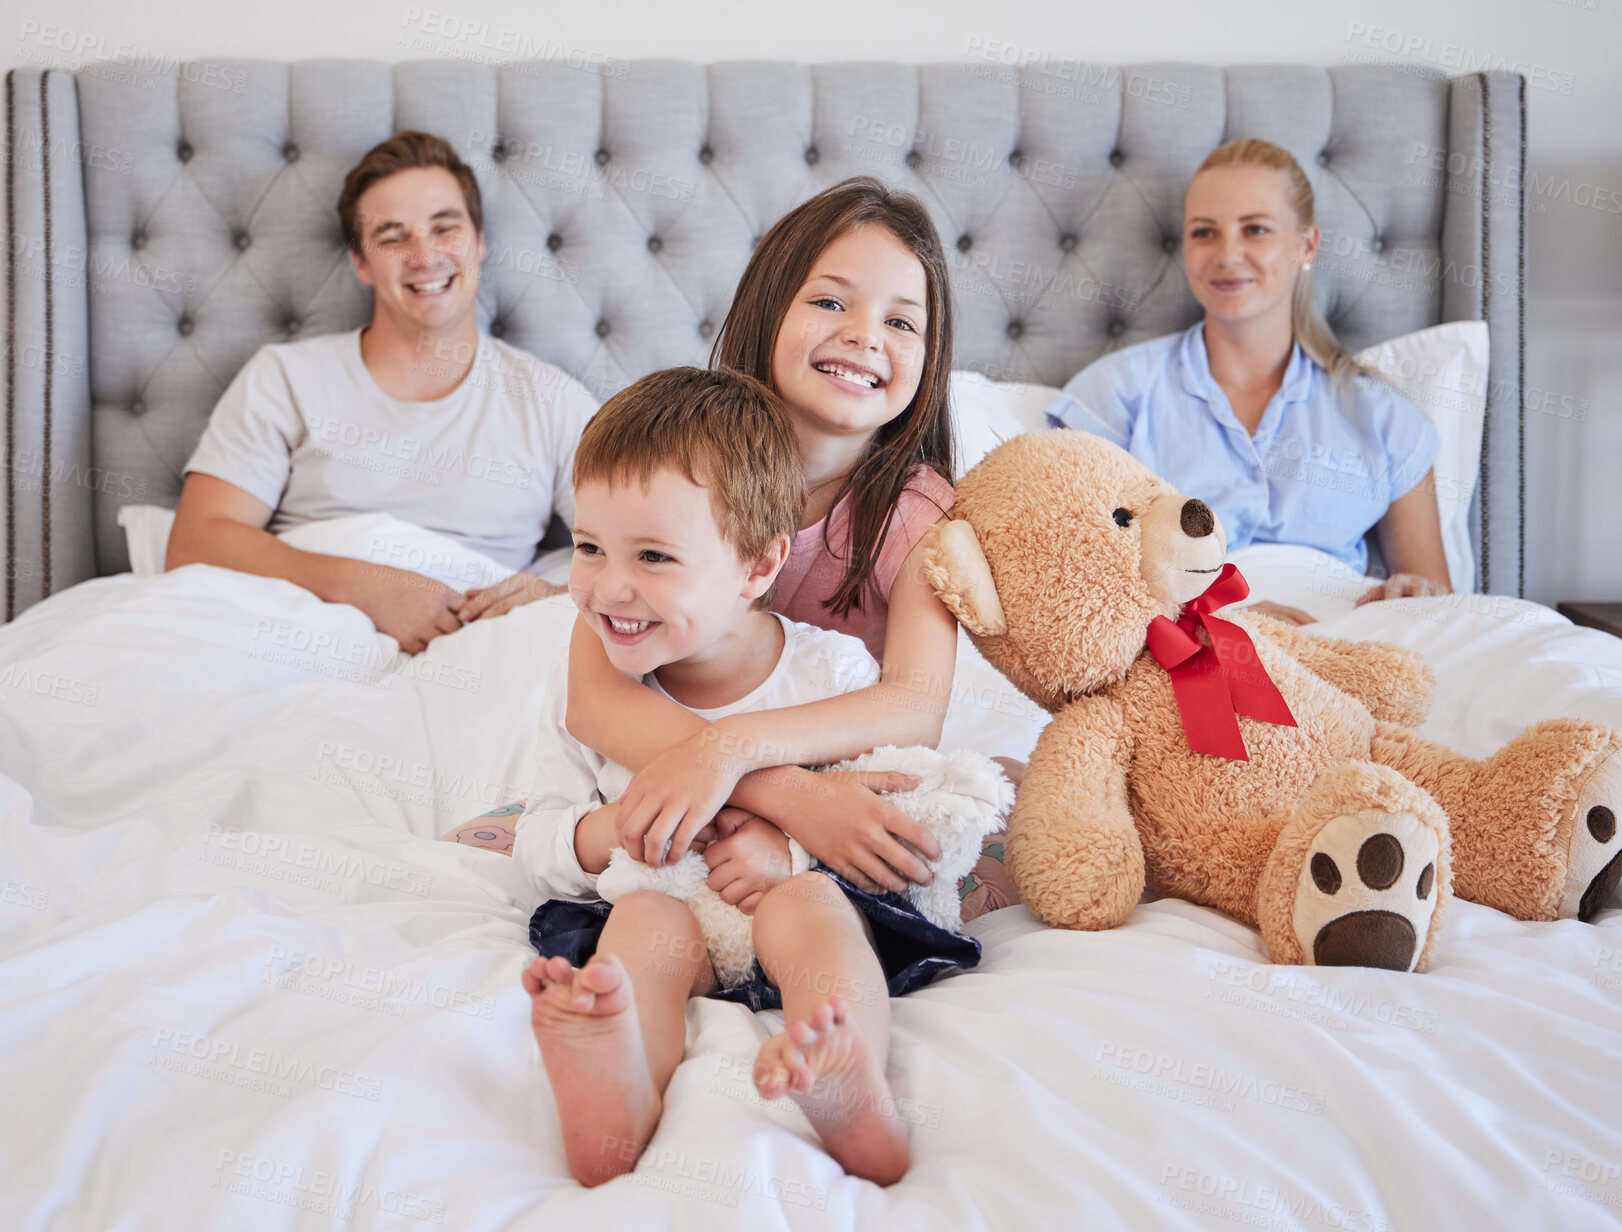 Buy stock photo Adorable little girl embracing her younger brother with her teddybear next to her while sitting on a bed with per parents in the background. Loving young caucasian family bonding and spending time together in the morning. Having a big sister means you'll always feel loved and cared for